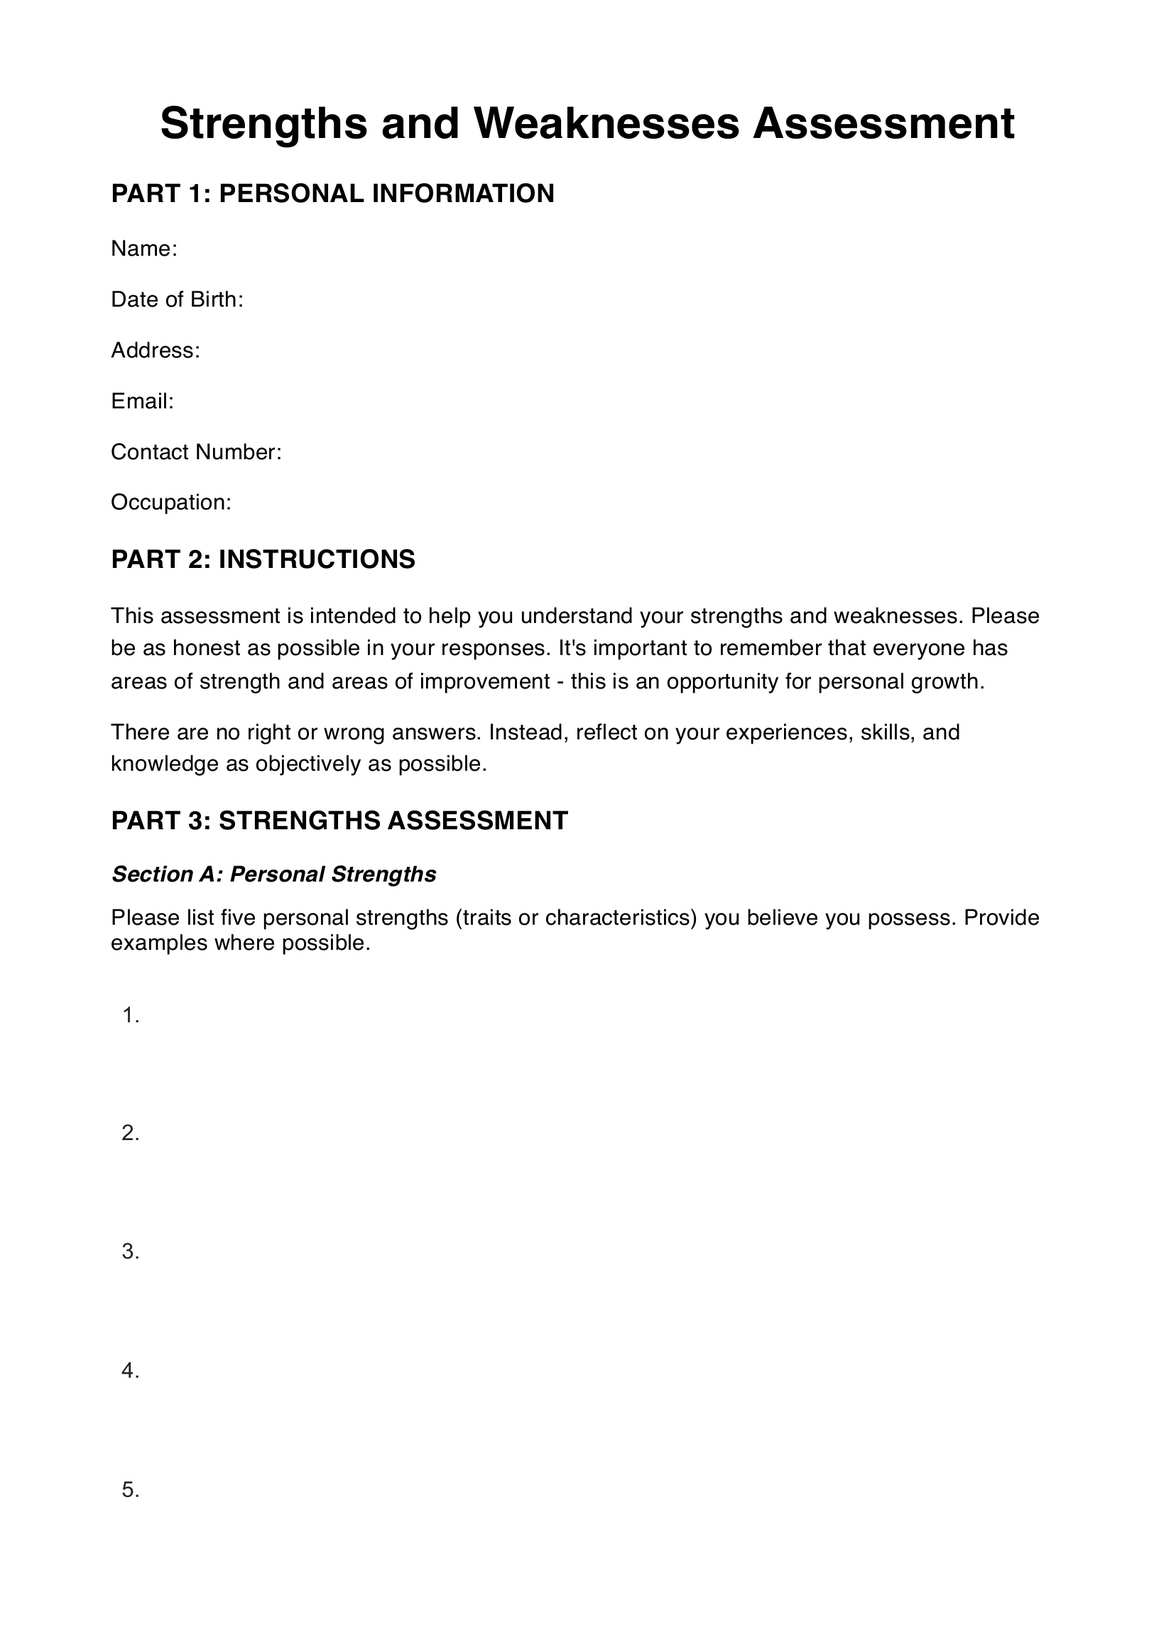 Strengths and Weaknesses Assessment PDF Example